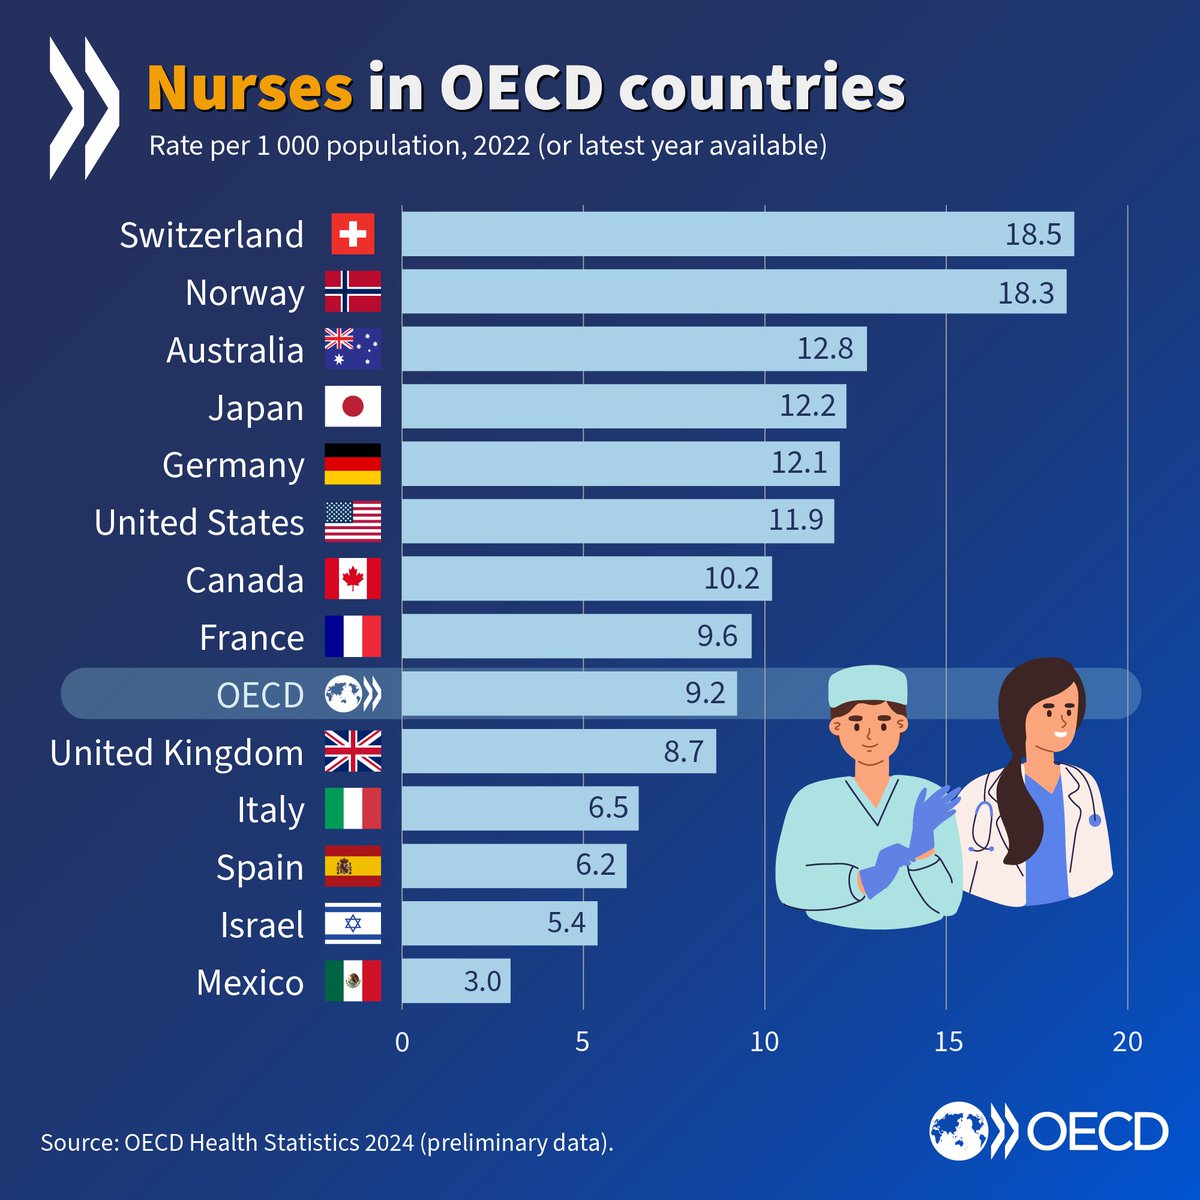 On #InternationalNursesDay, compare the number of #nurses across OECD countries and learn more about how much interest there is in becoming one. 👉 See latest analysis oe.cd/5xB | #IND #IND2024 #OurNursesOurFuture